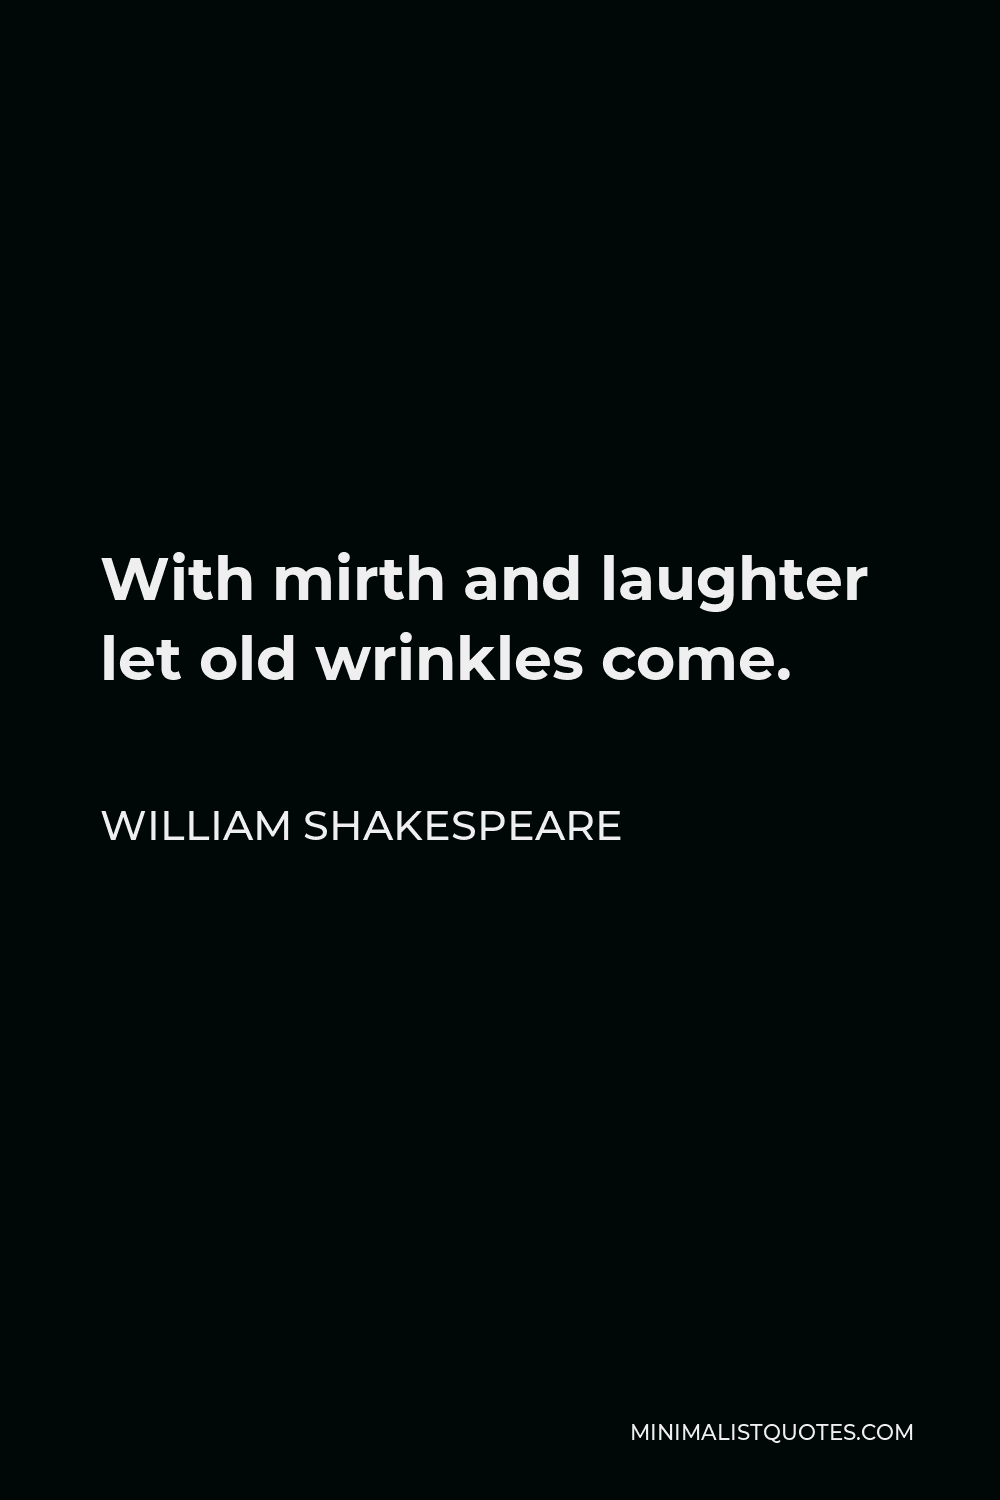 William Shakespeare Quote - With mirth and laughter let old wrinkles come.